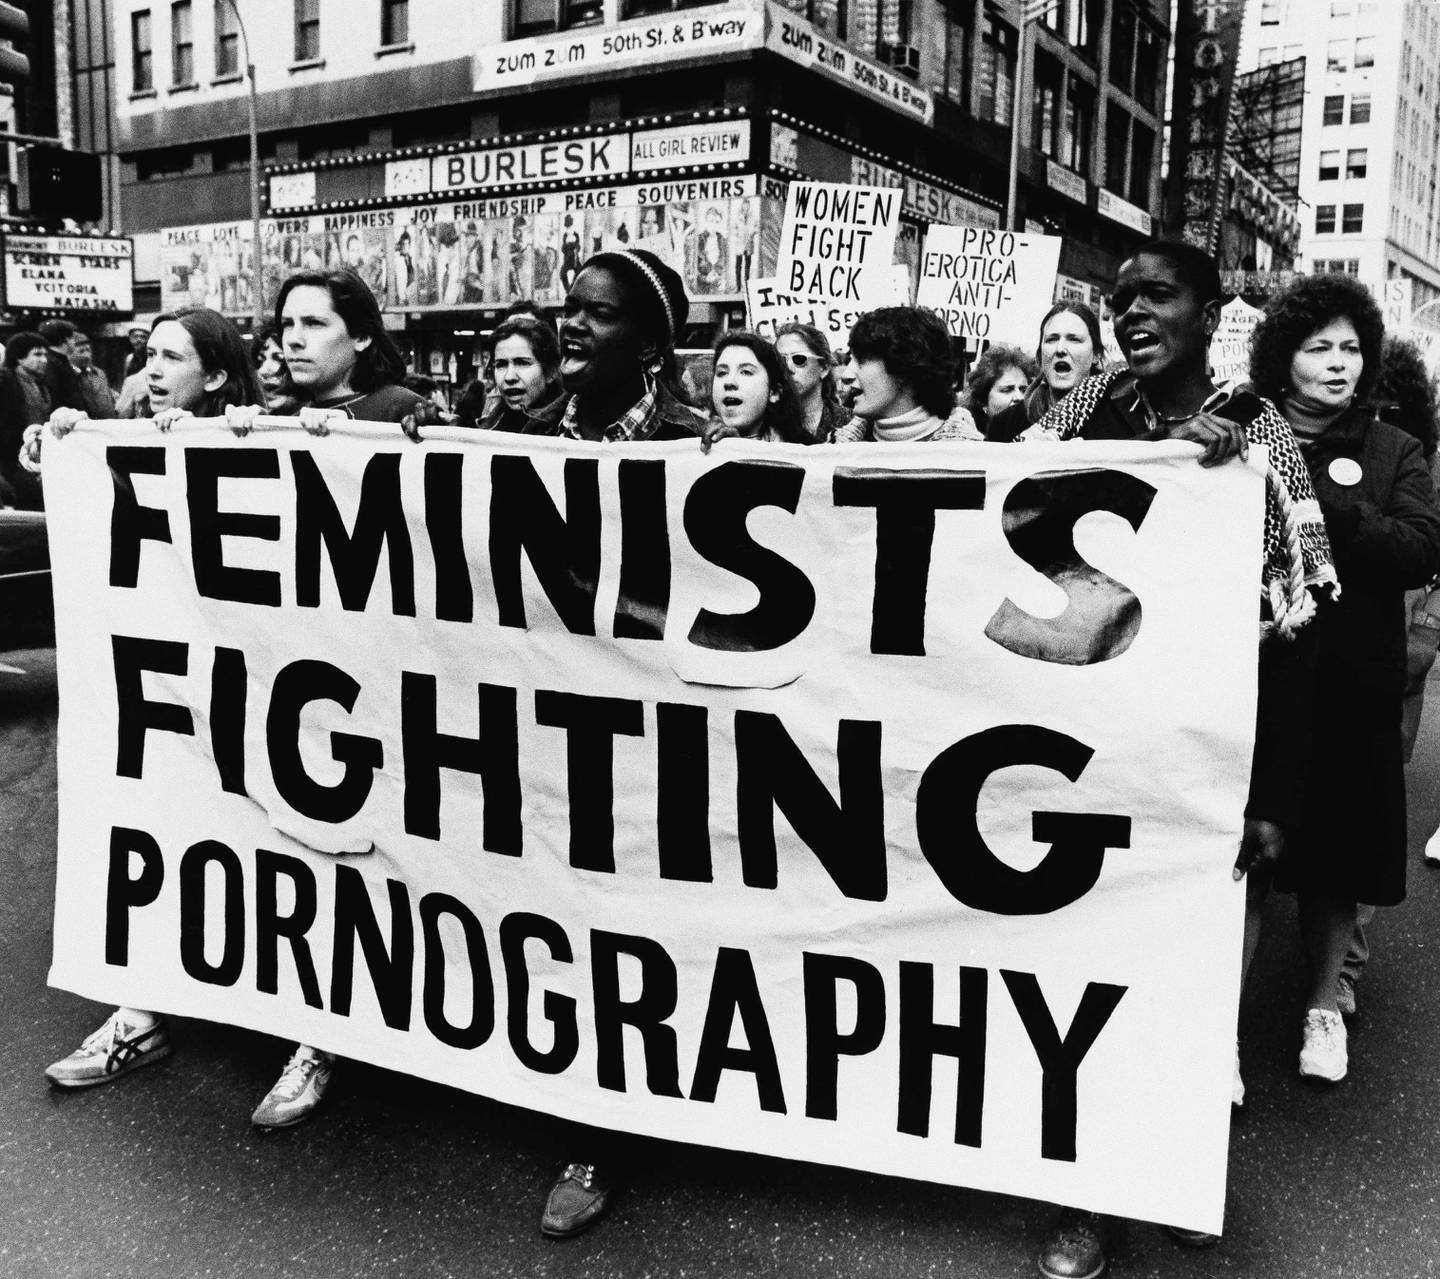 Nearly 200 women and men march through the New York City's Times Square area, April 9, 1984  protesting pornography. The women marched to various peep-show parlors and x-rated theaters in the area, speaking out against what they called the indignity toward women in pornographic films and publications. (AP Photo/Nancy Kaye)